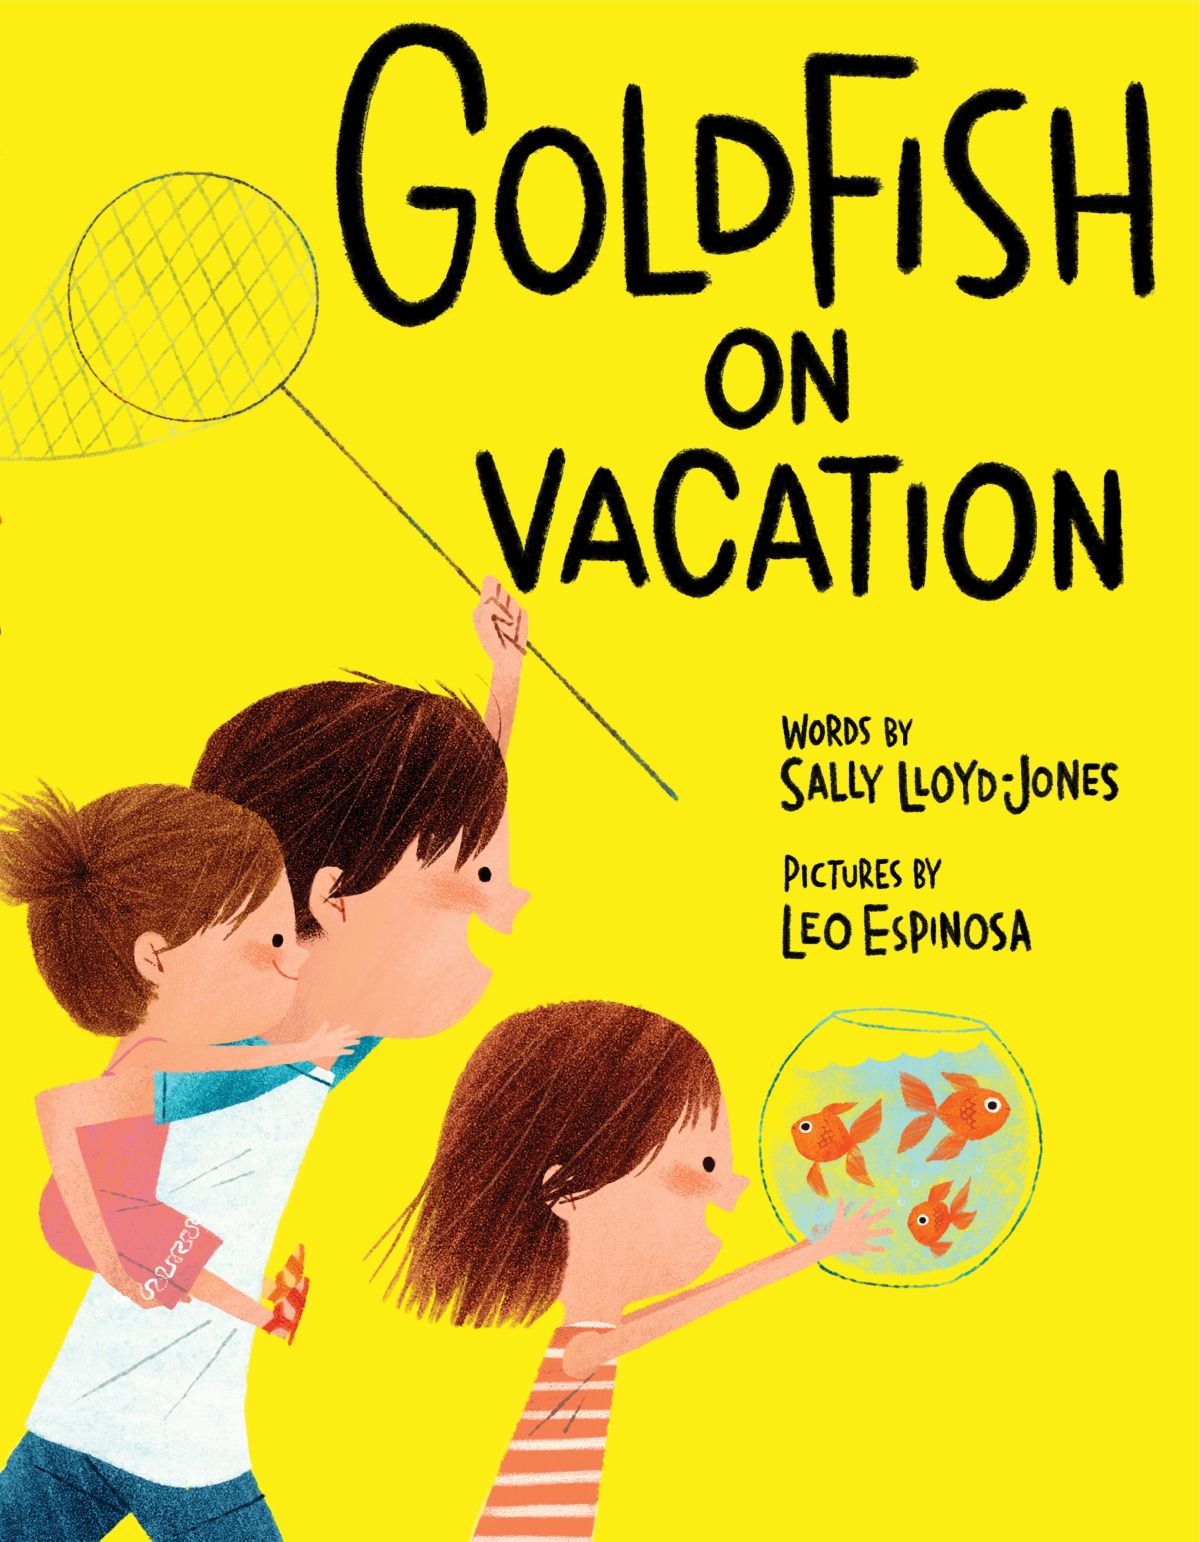 Goldfish-on-Vacation-cover